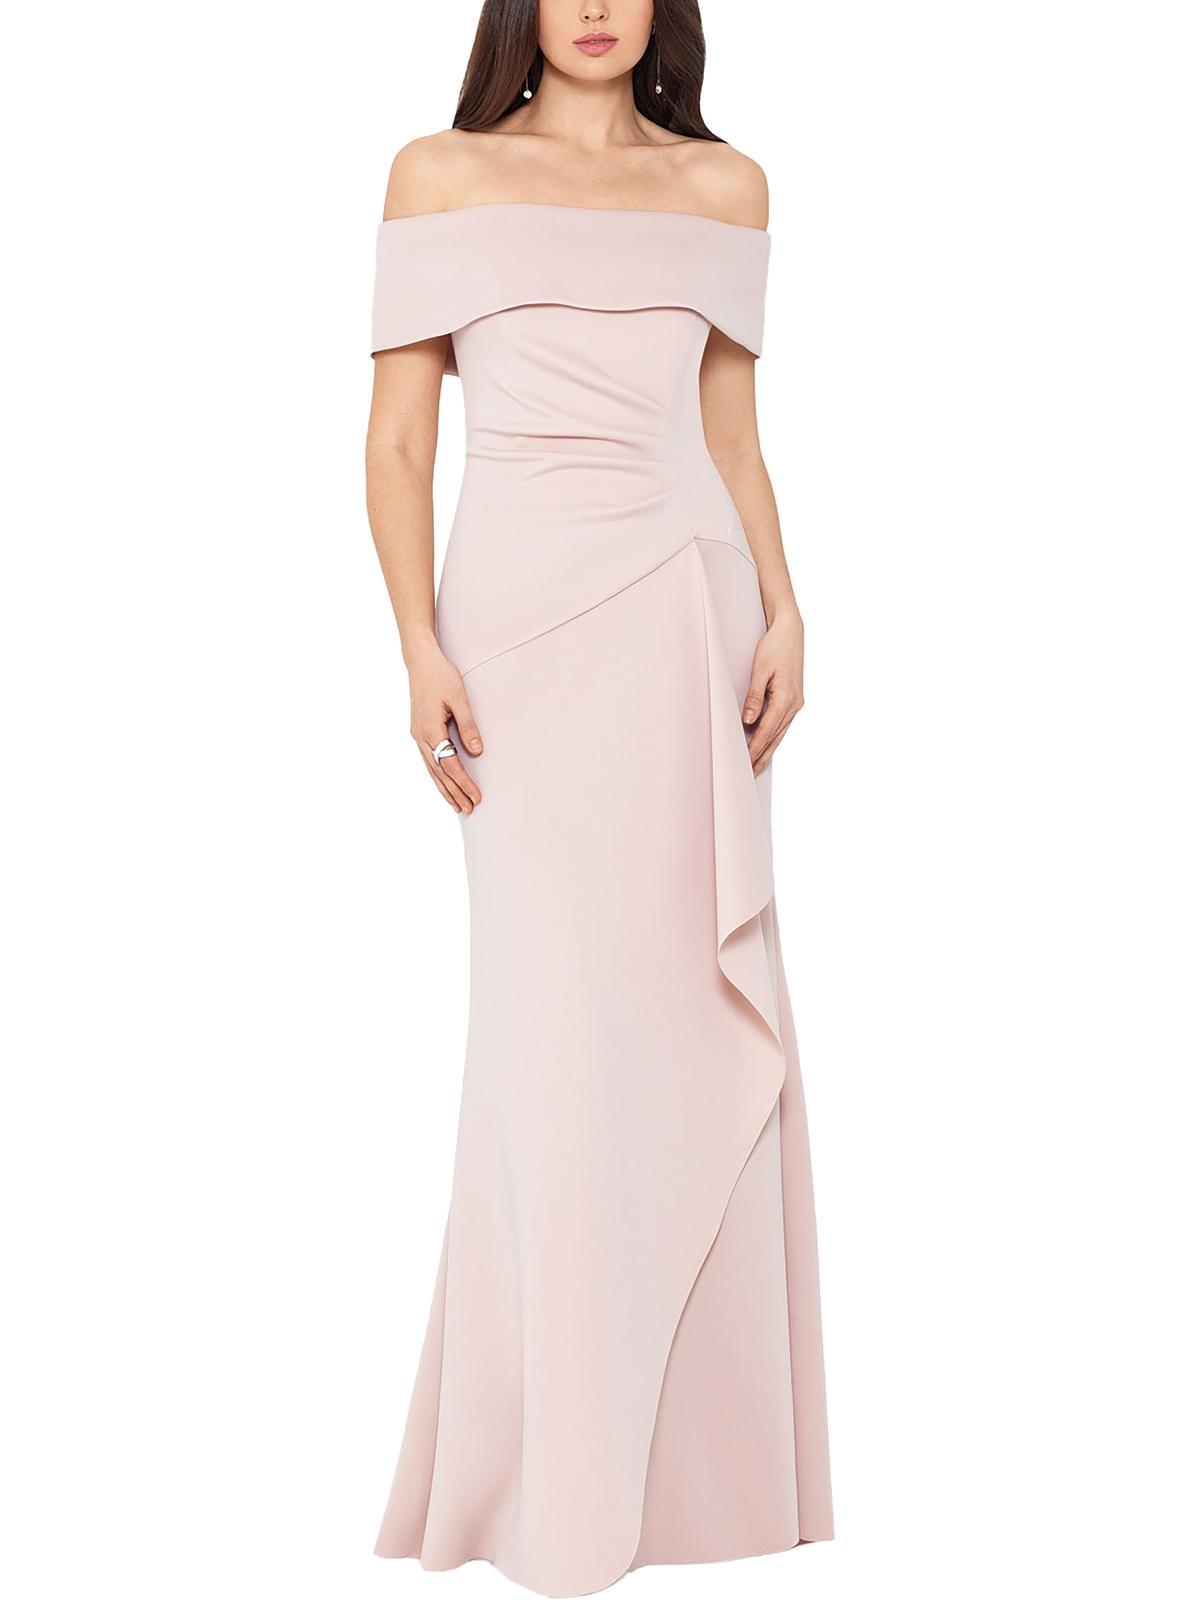 Xscape Ruffled Off The Shoulder Maxi Dress in Pink | Lyst